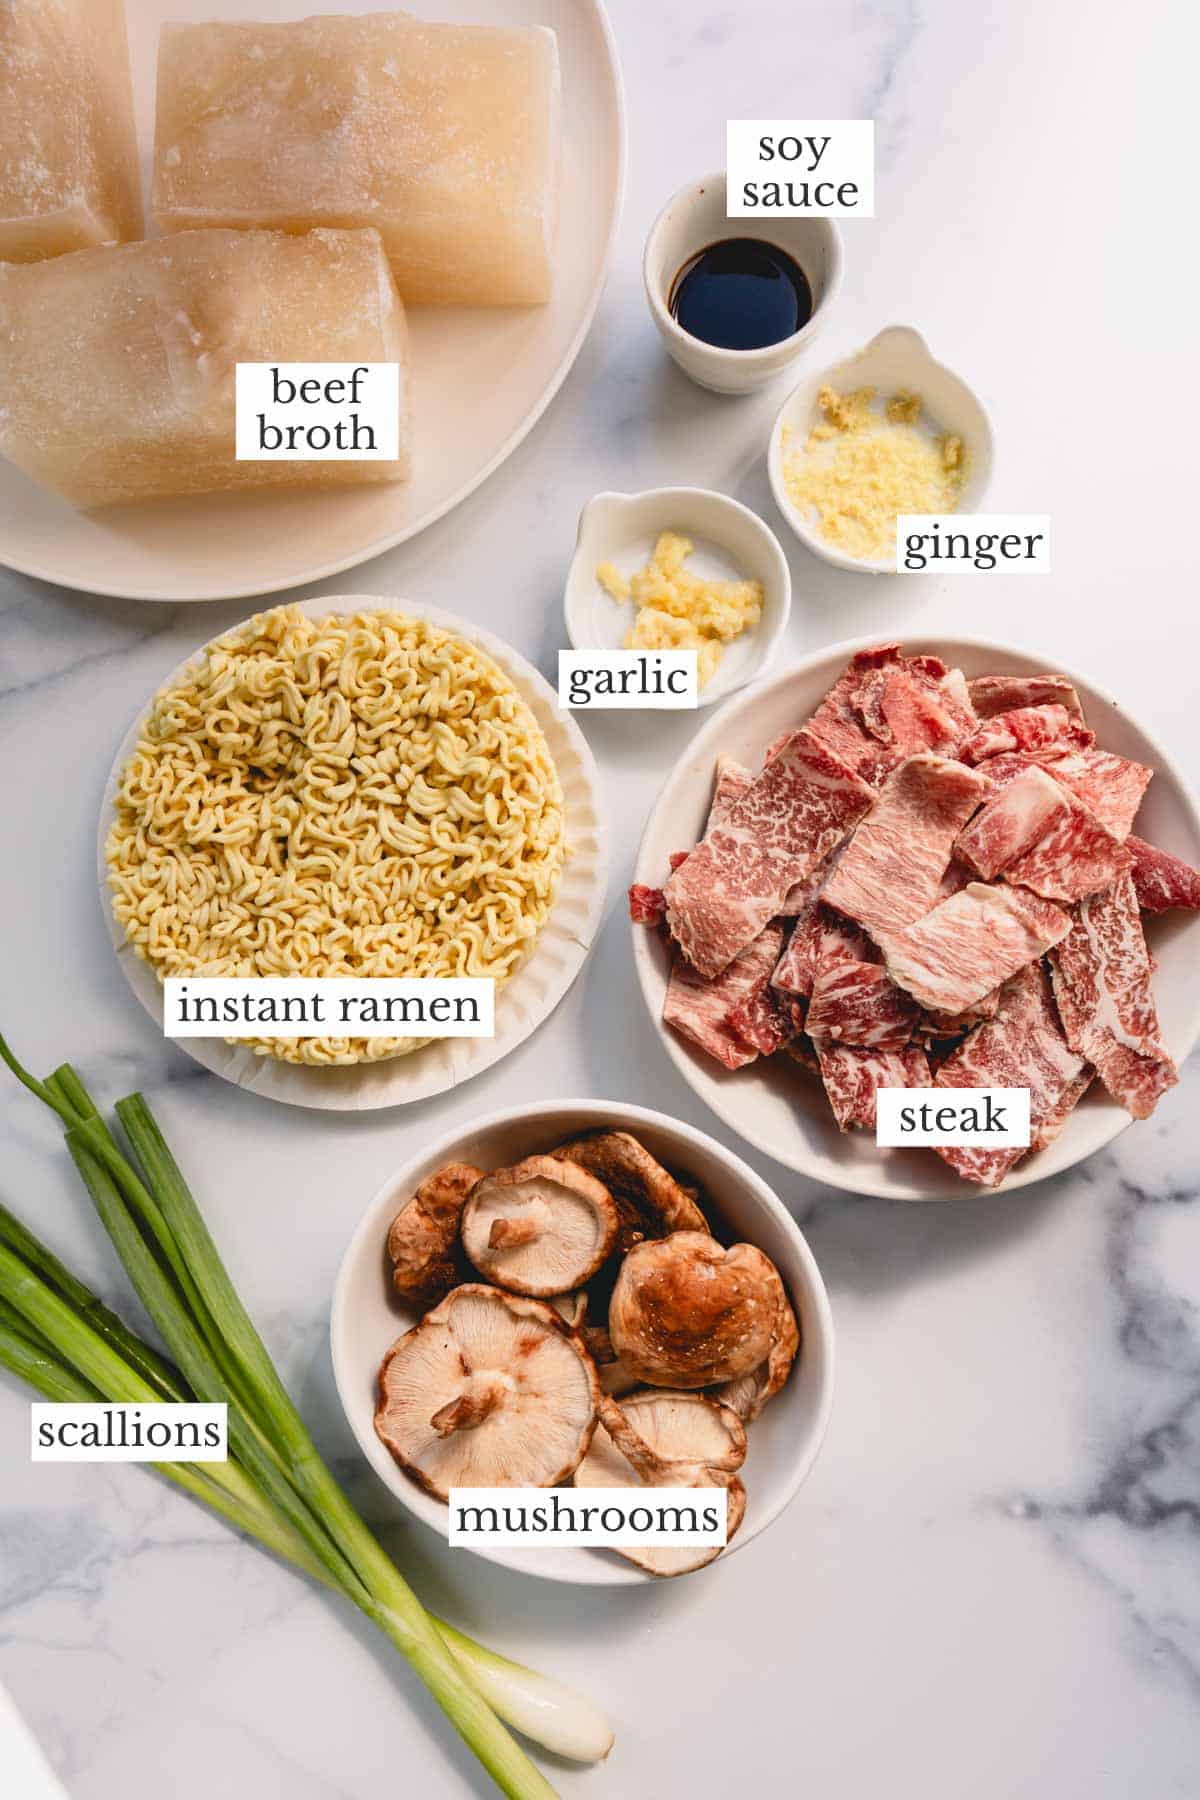 Ingredients needed to make an easy ramen recipe with mushrooms and steak.